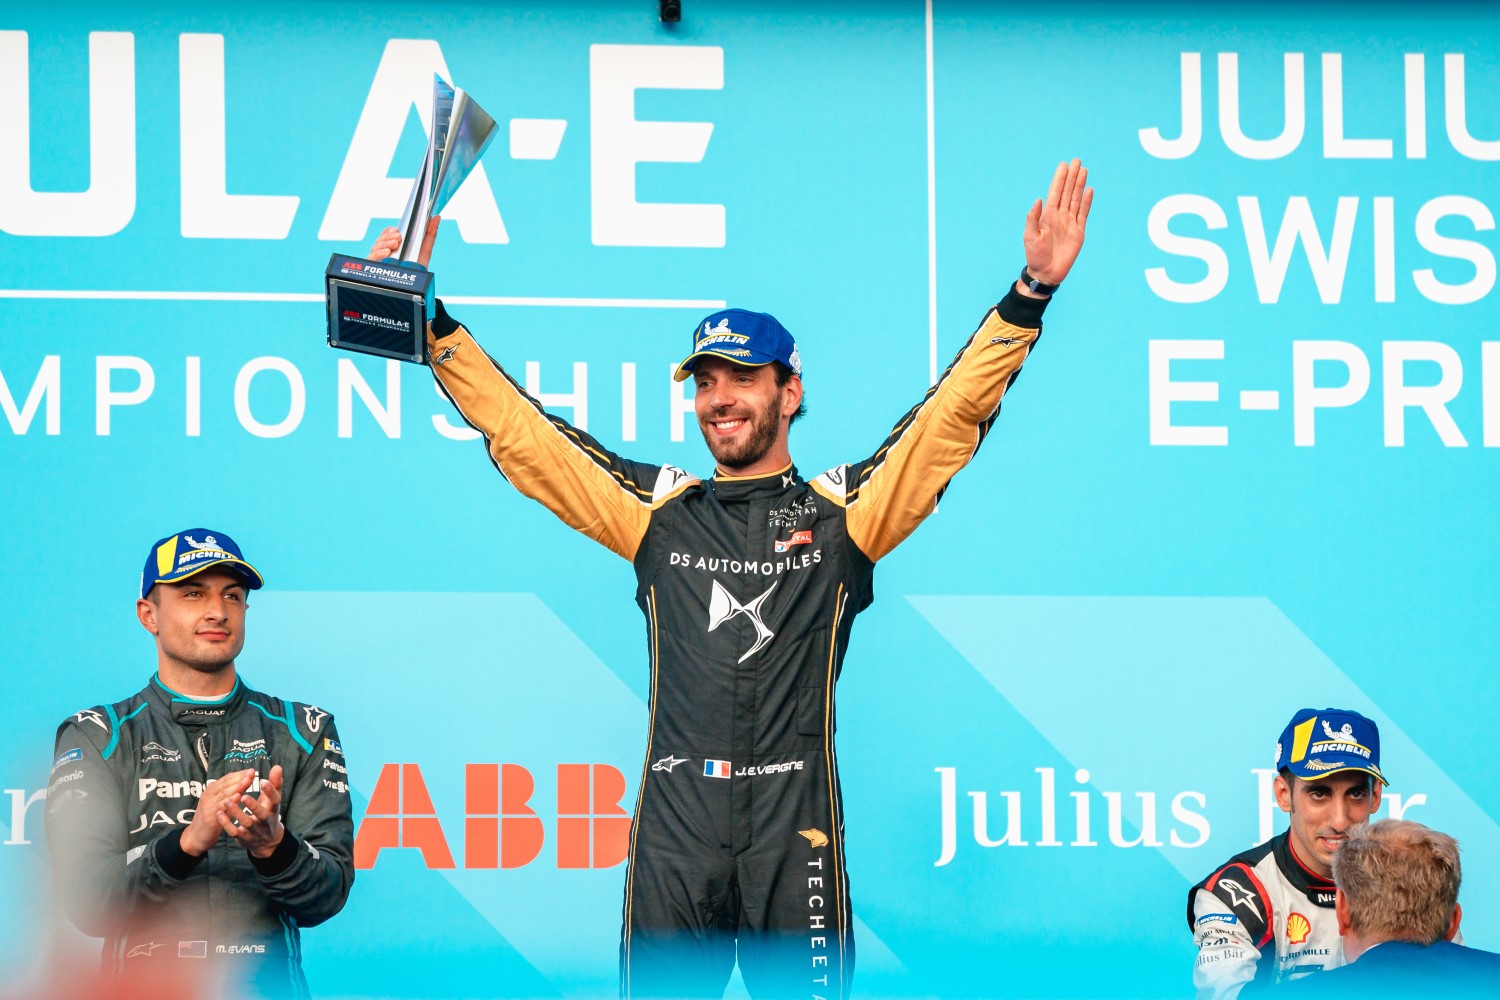 Jean-Eric Vergne drives in Formula E now